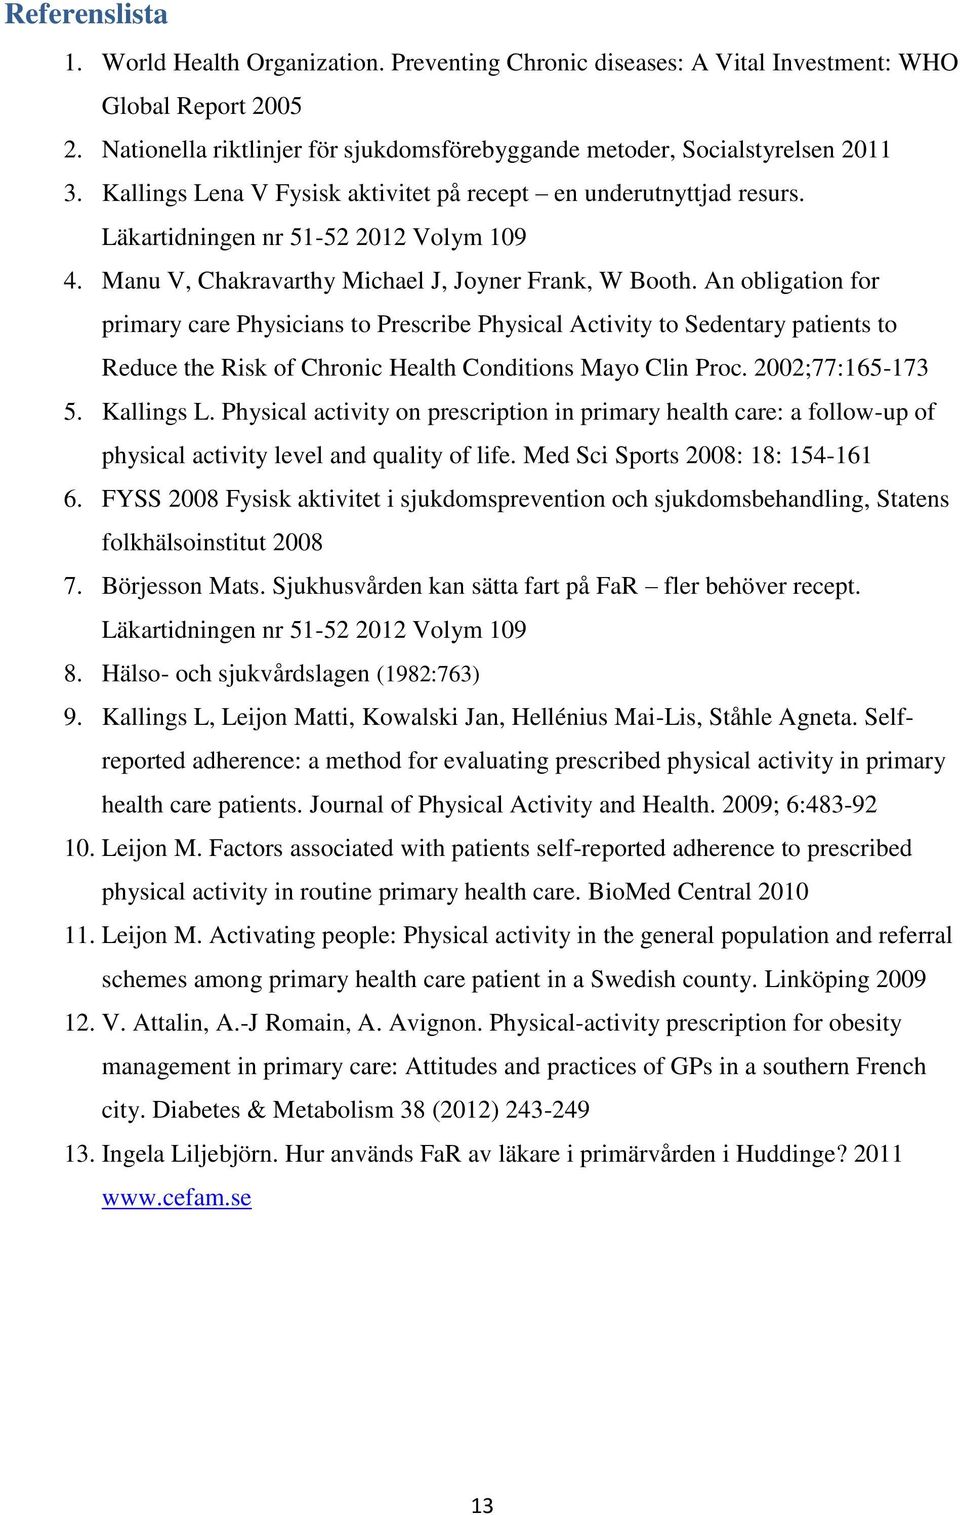 An obligation for primary care Physicians to Prescribe Physical Activity to Sedentary patients to Reduce the Risk of Chronic Health Conditions Mayo Clin Proc. 2002;77:165-173 5. Kallings L.